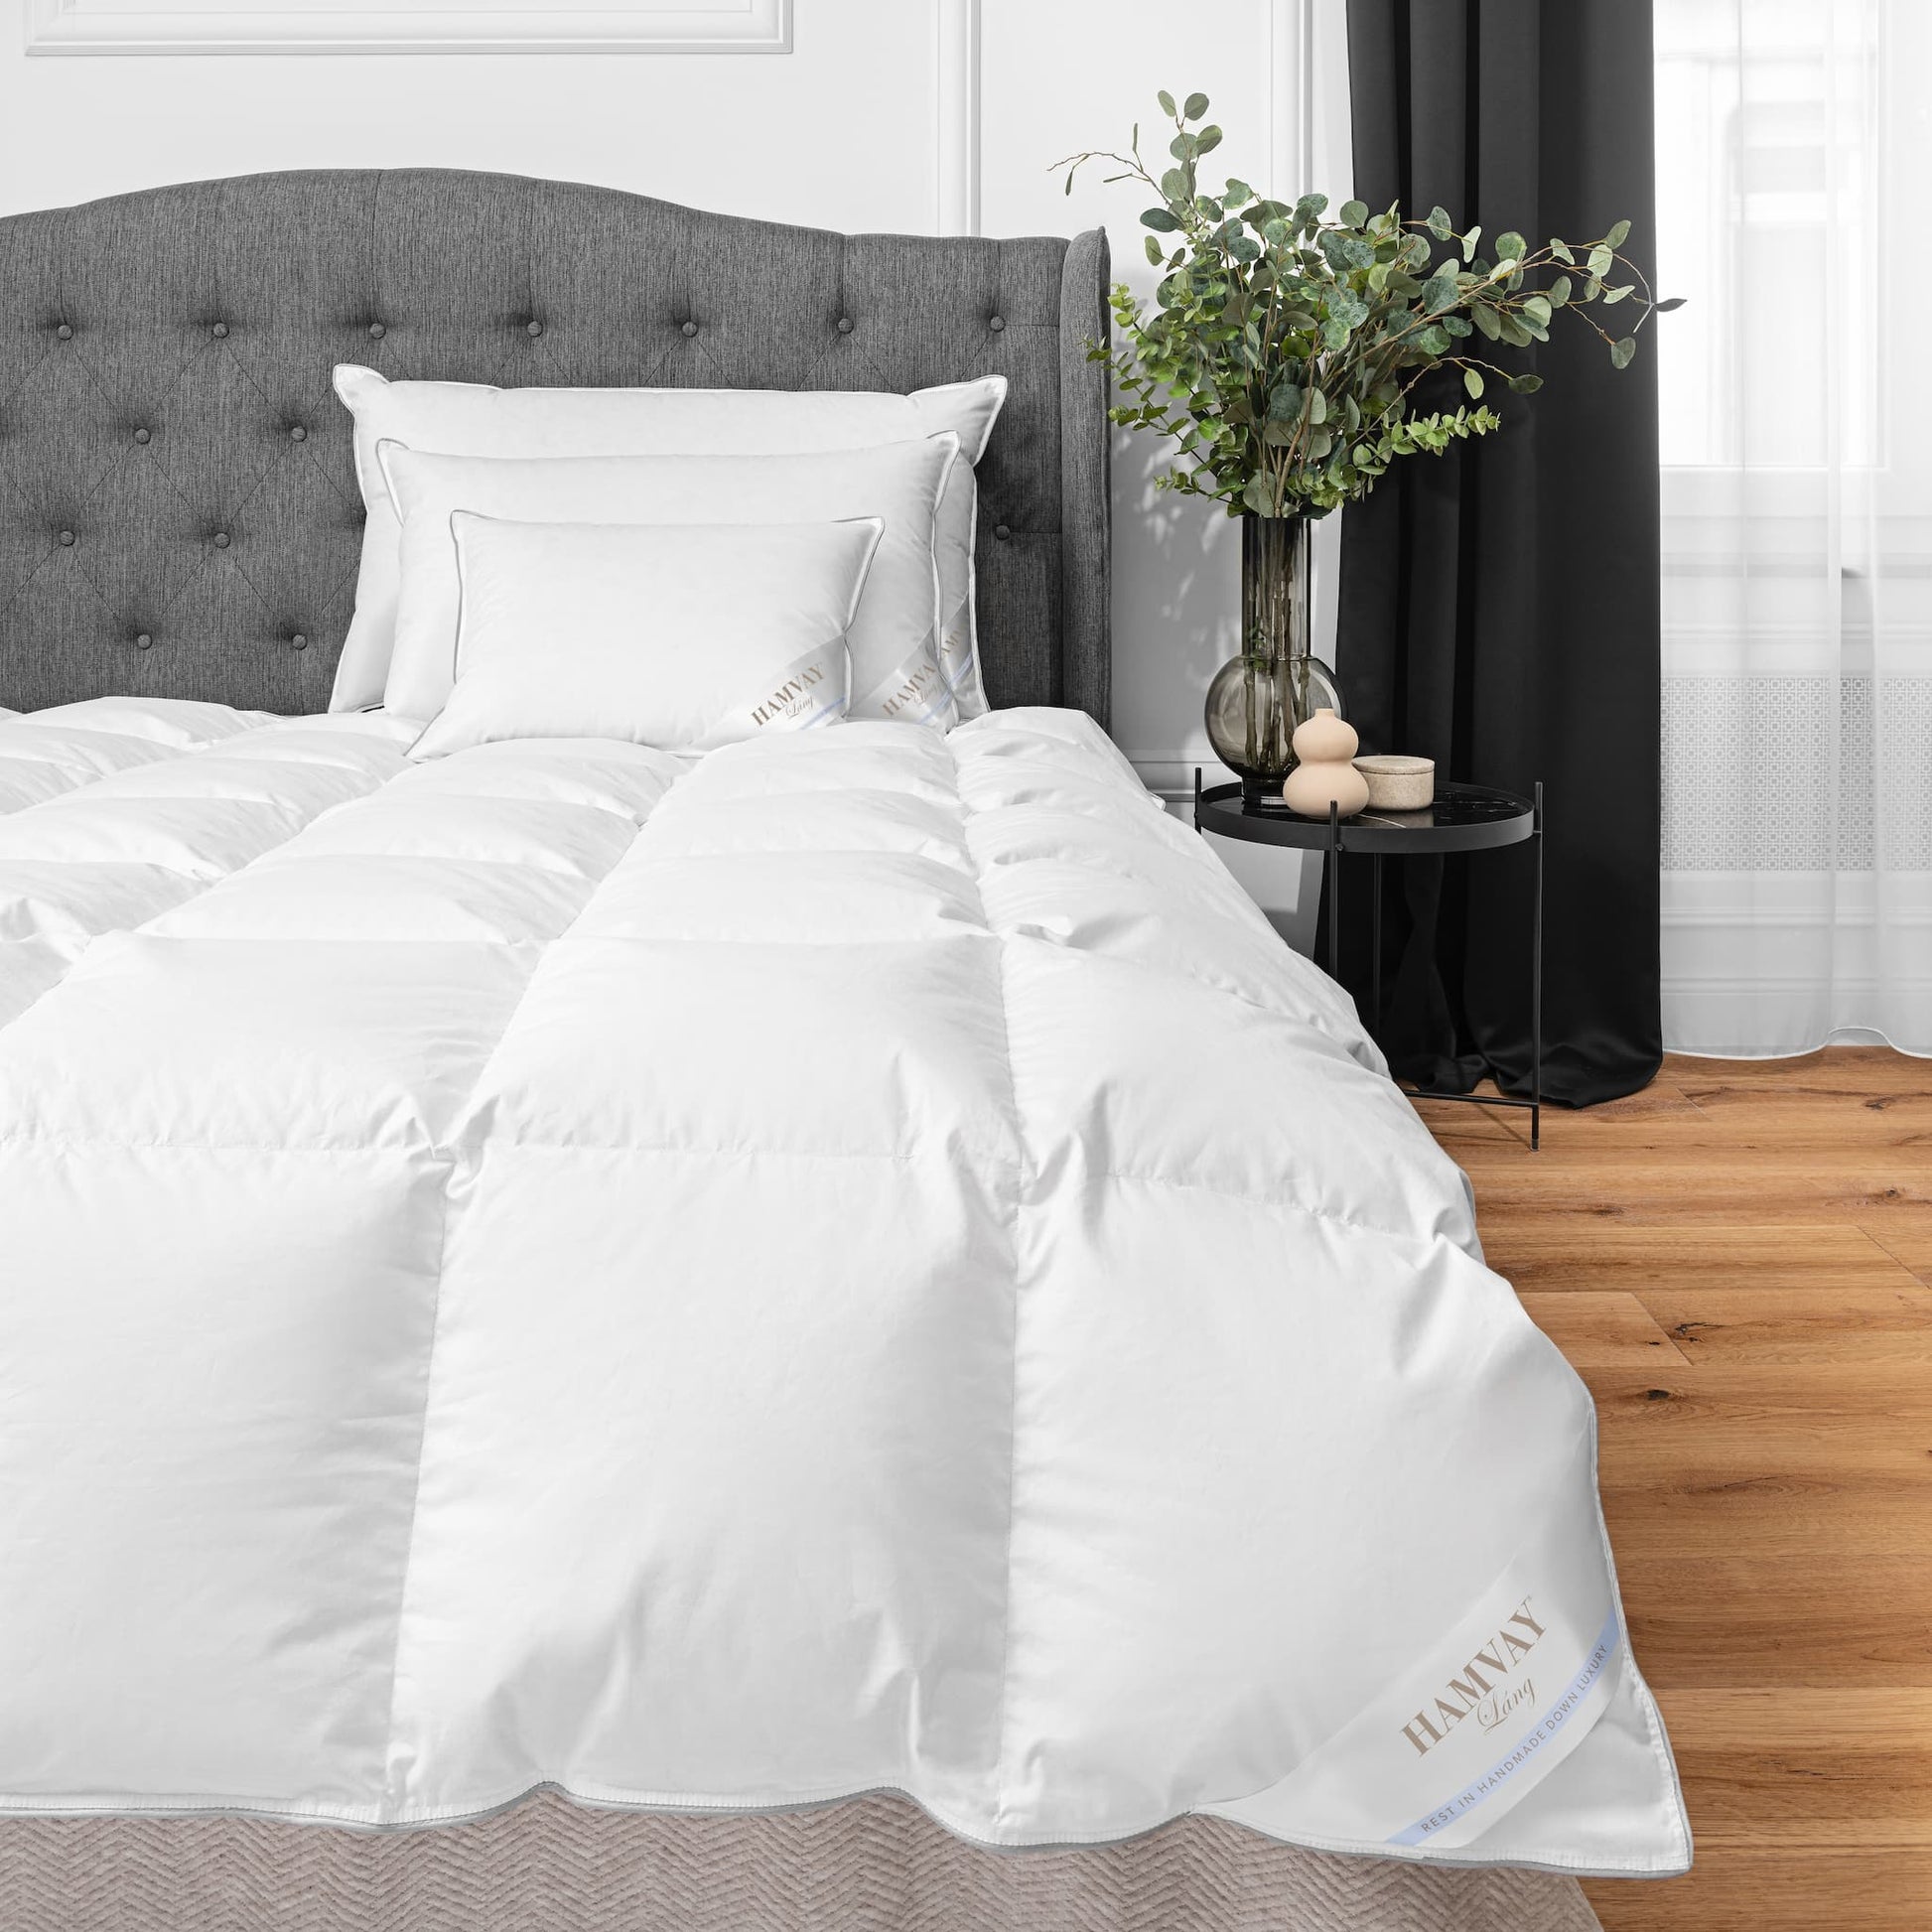 Ultimate Hungarian goose down comforter and pillows on a neatly made bed